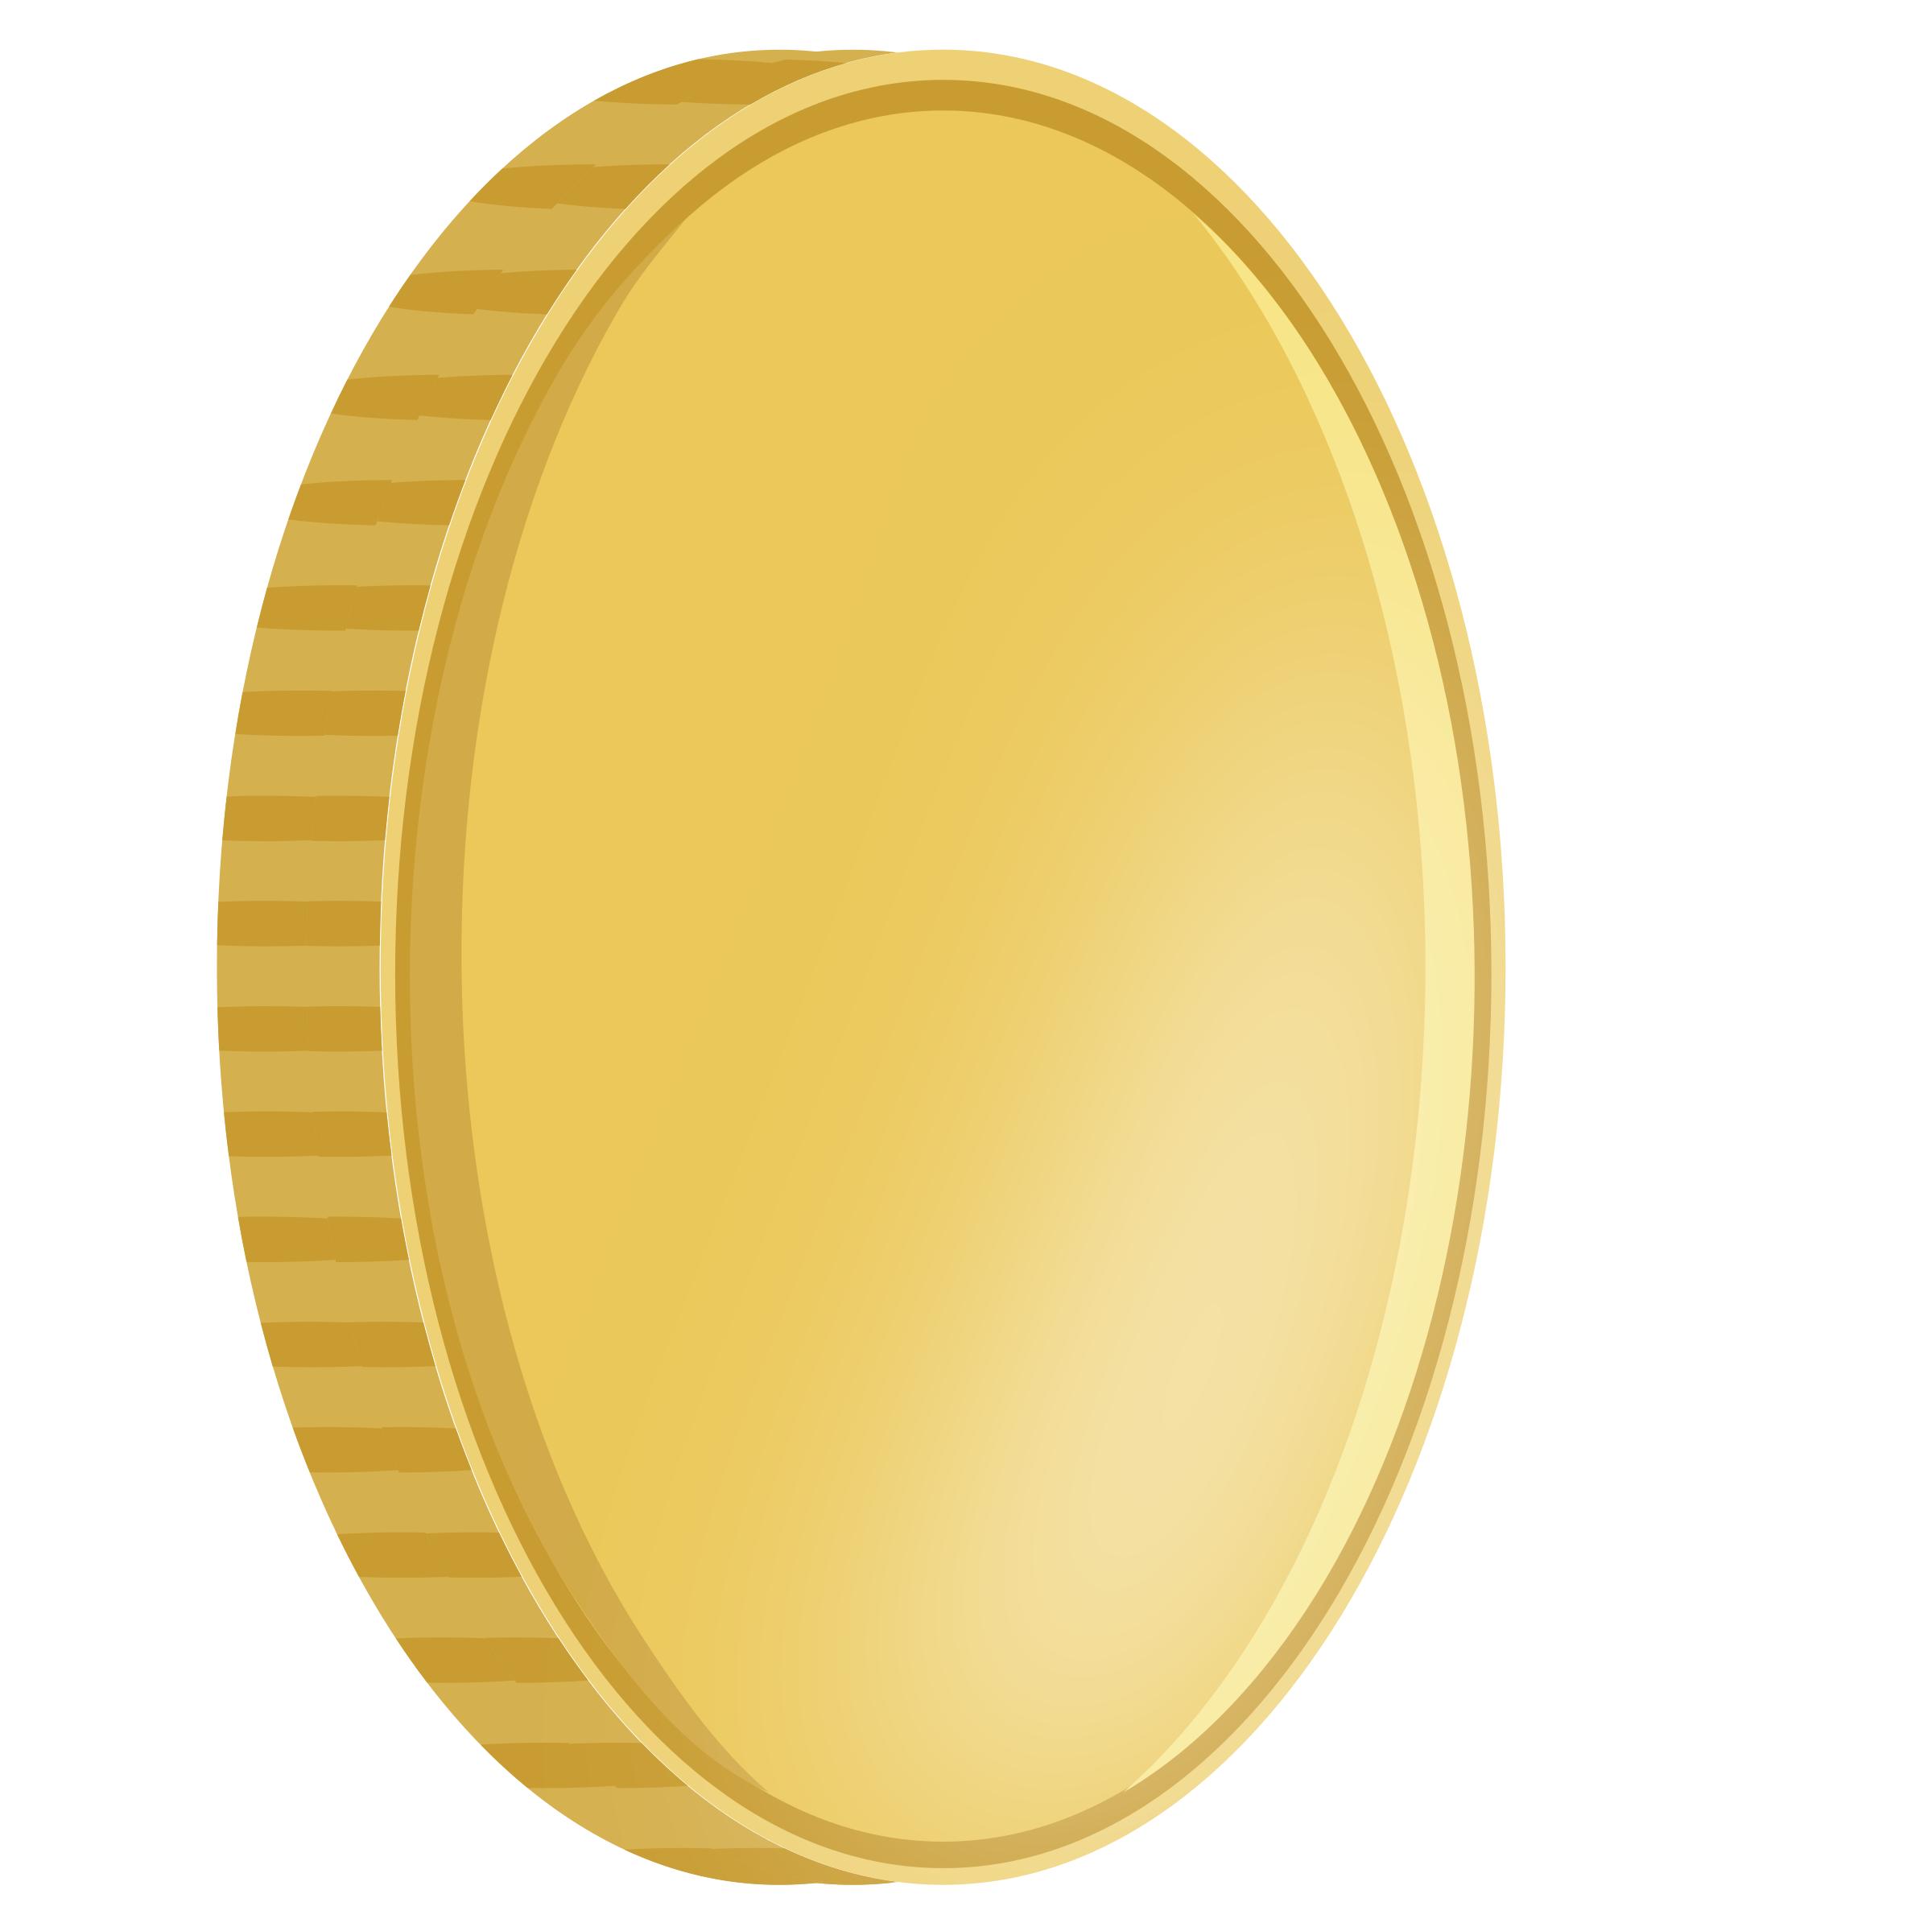 Spinning coin 3 png